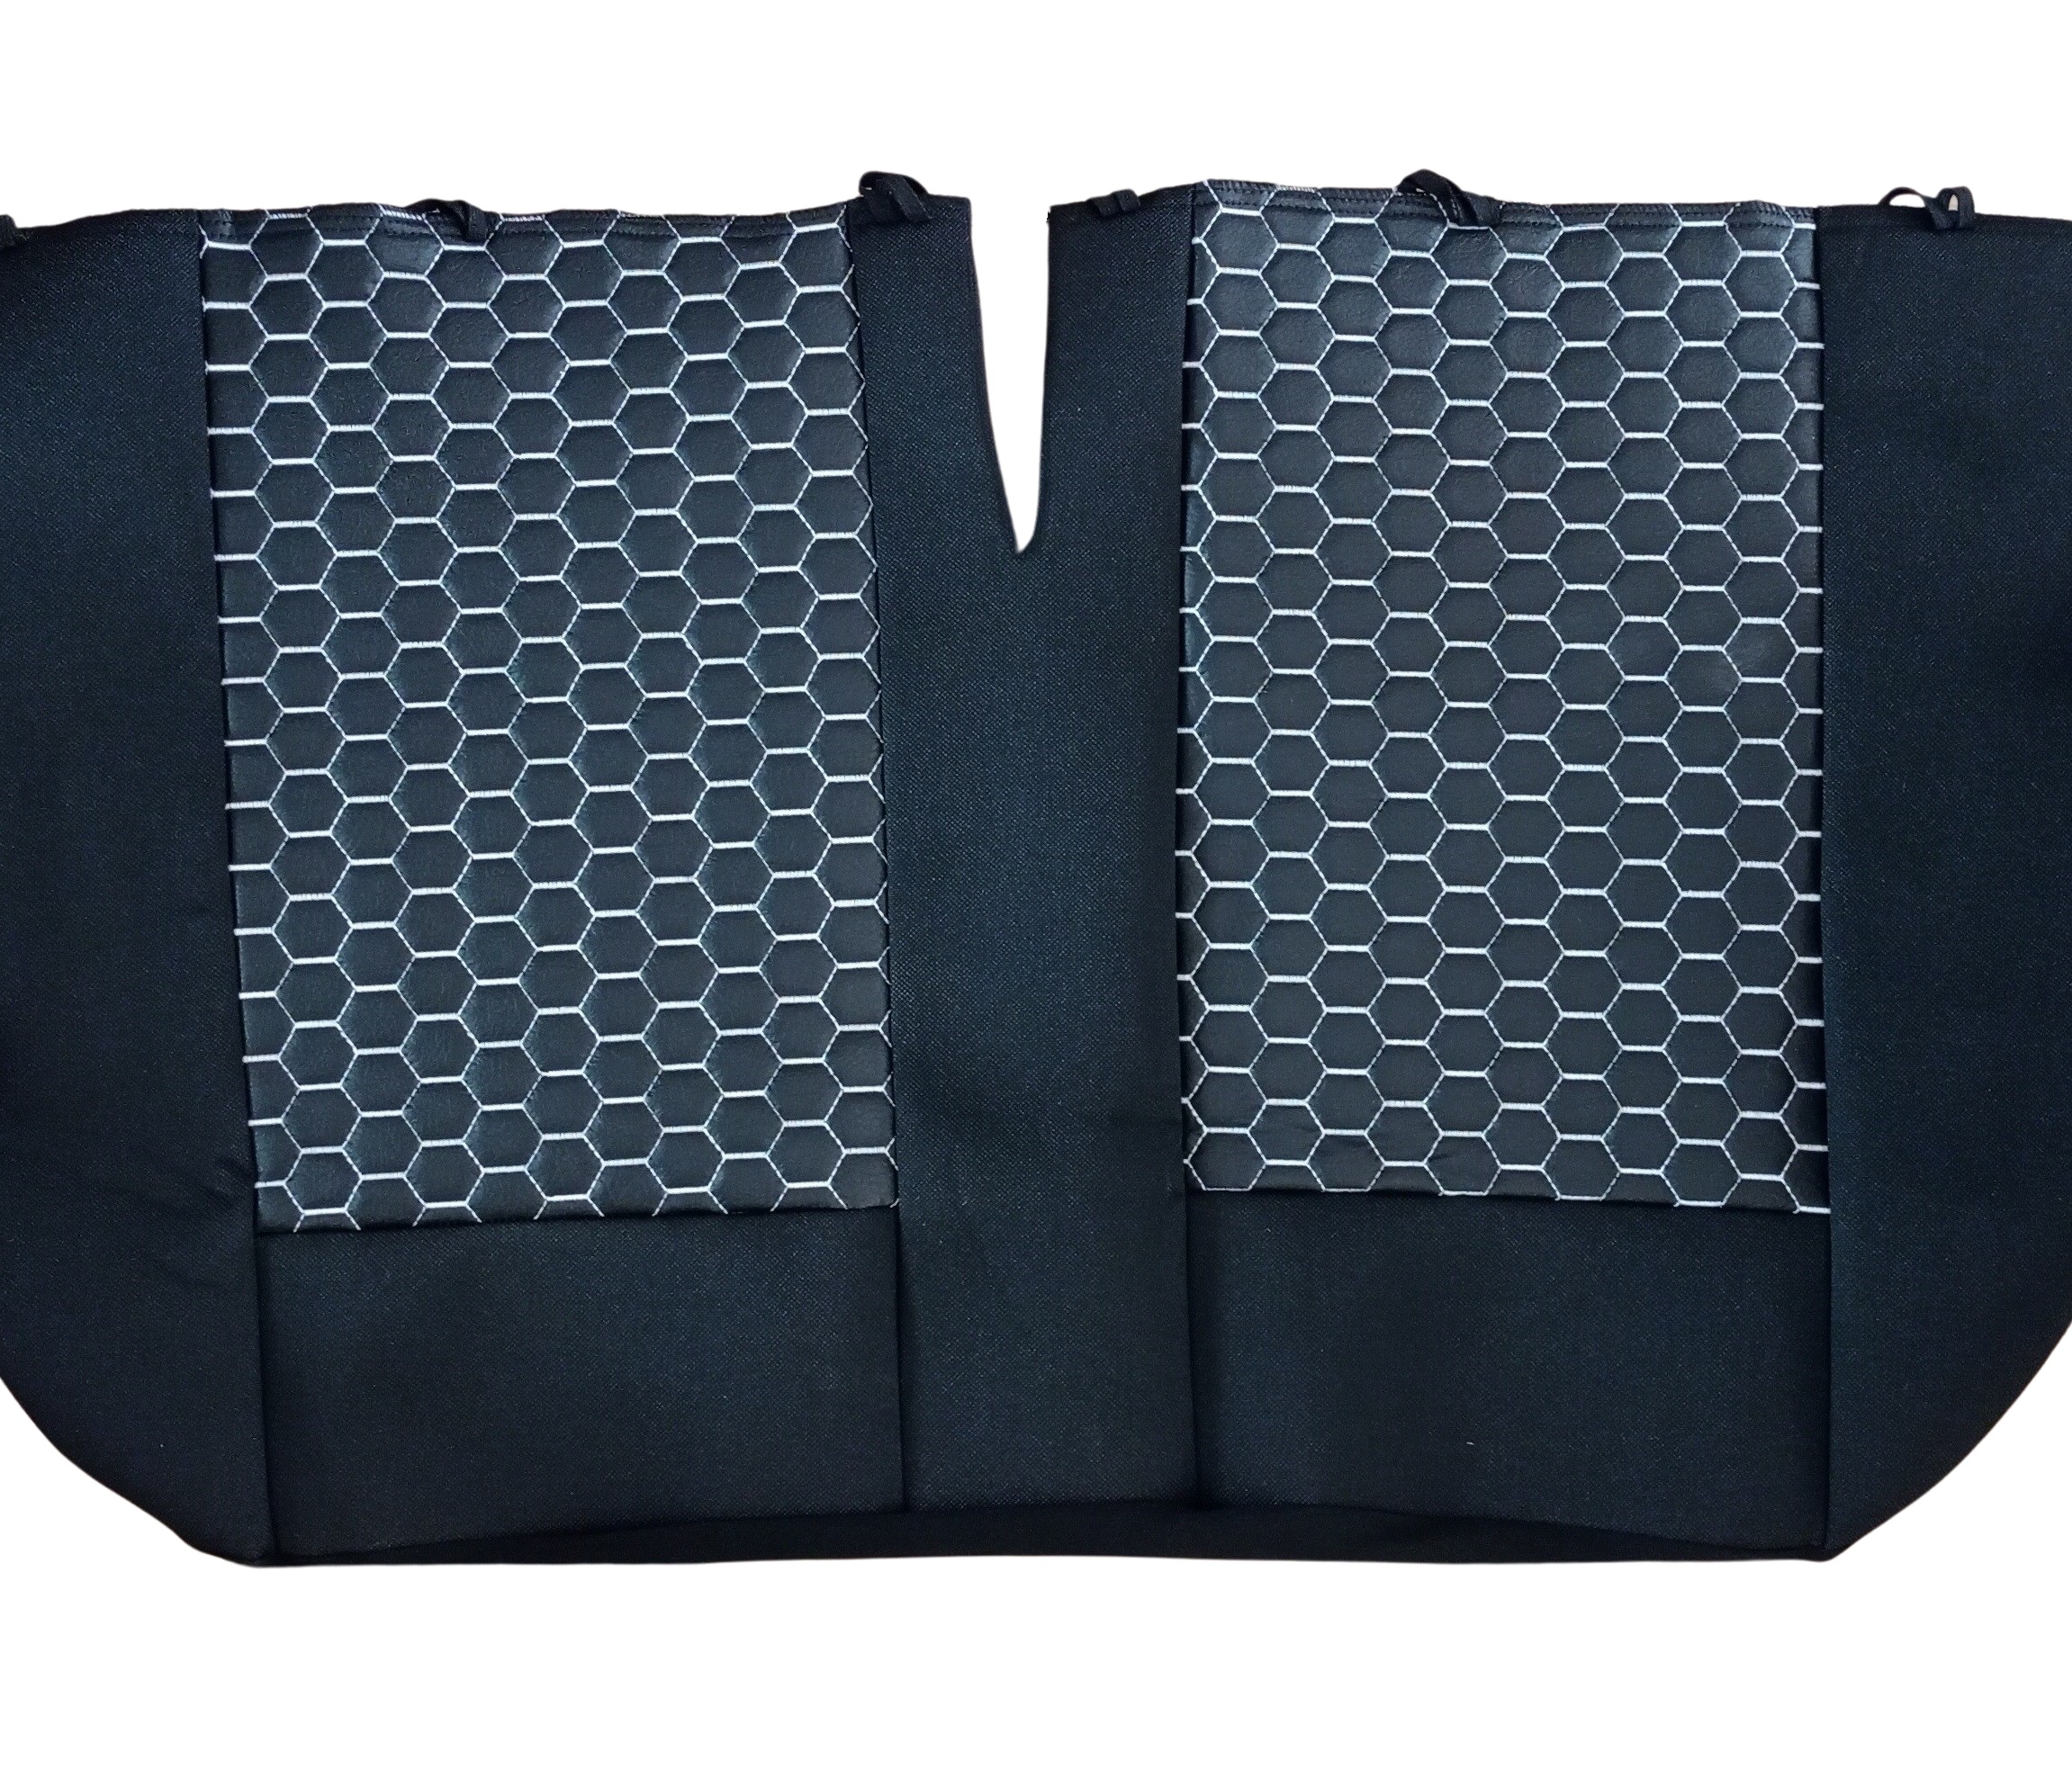 Seat covers for VW TRANSPORTER T5 Van Black White Leather Textile